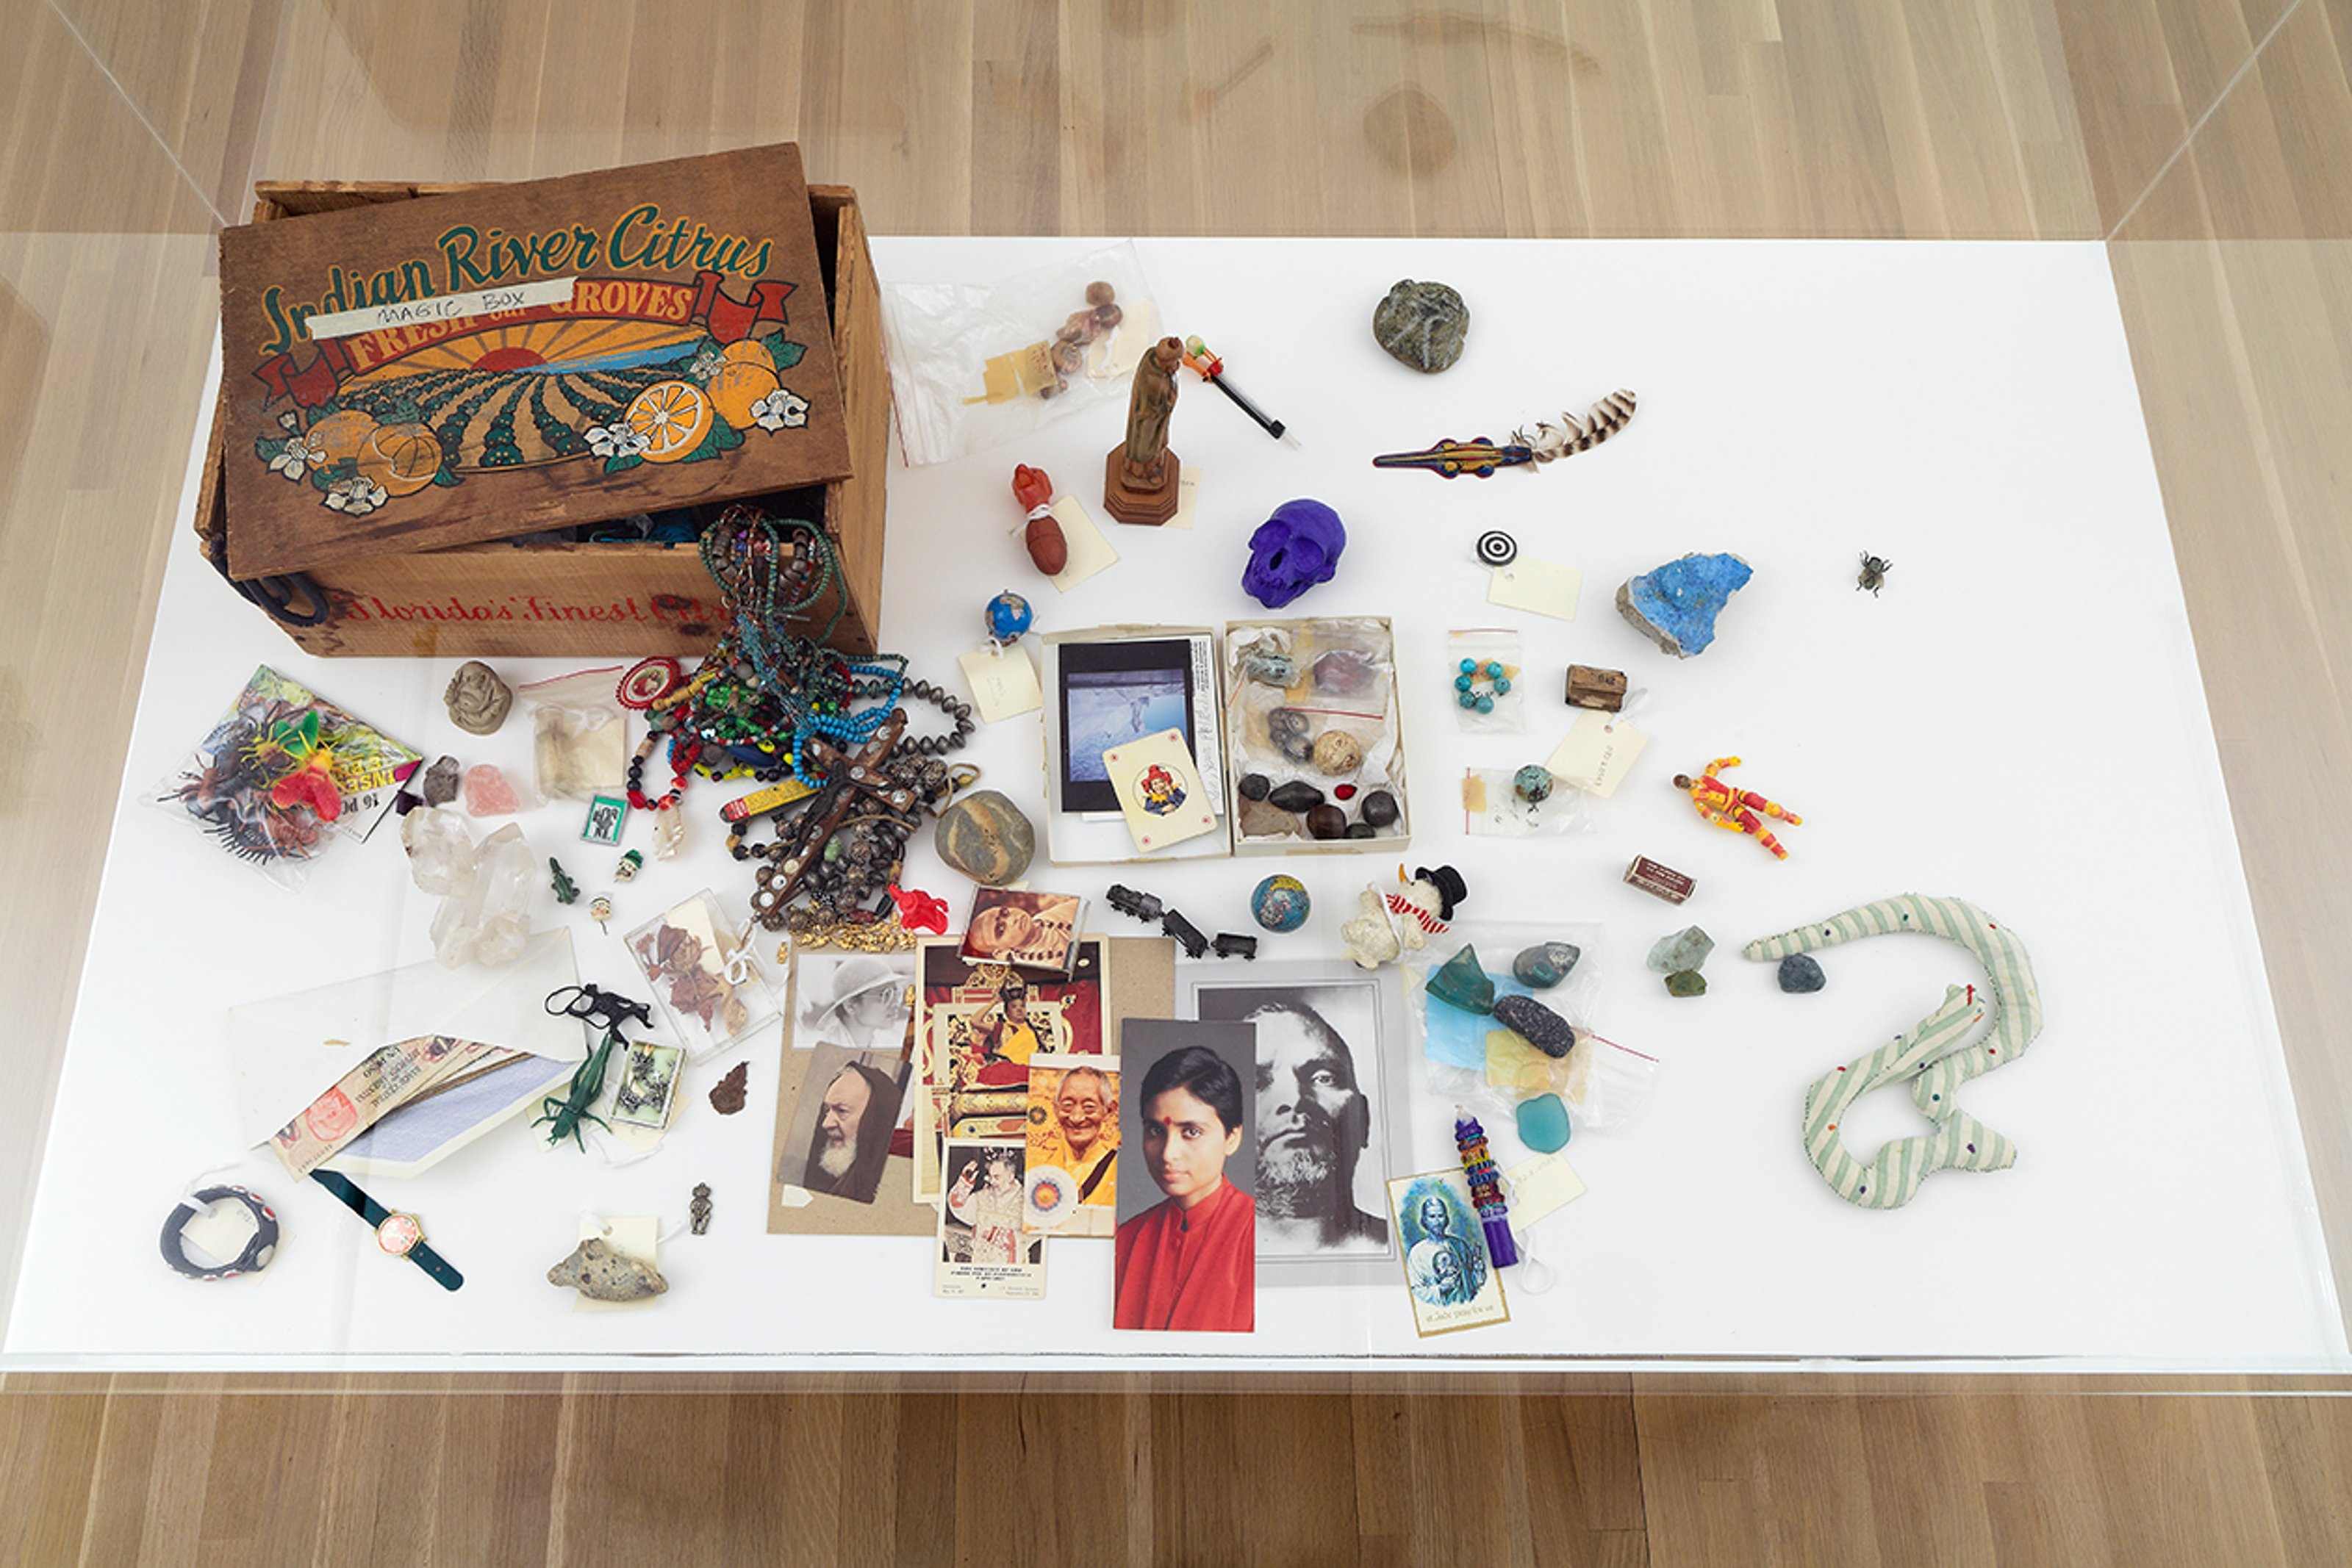 A cardboard box on the floor of a larger box with a white bottom and transparent sides, containing colorful objects, beaded jewelry, and photographs.